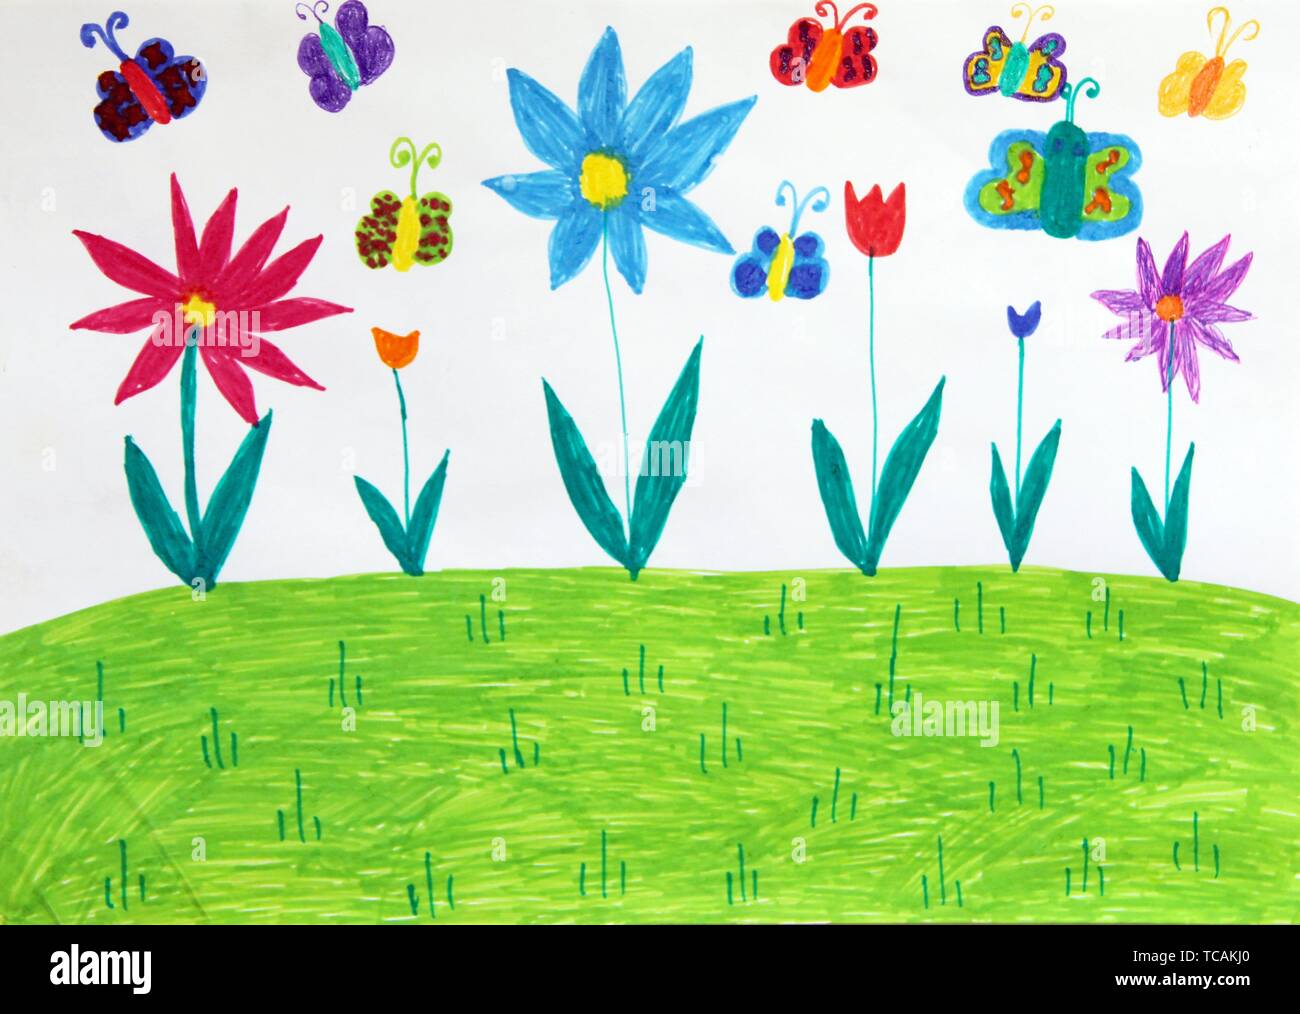 Children Drawing Images – Browse 17,060 Stock Photos, Vectors, and Video